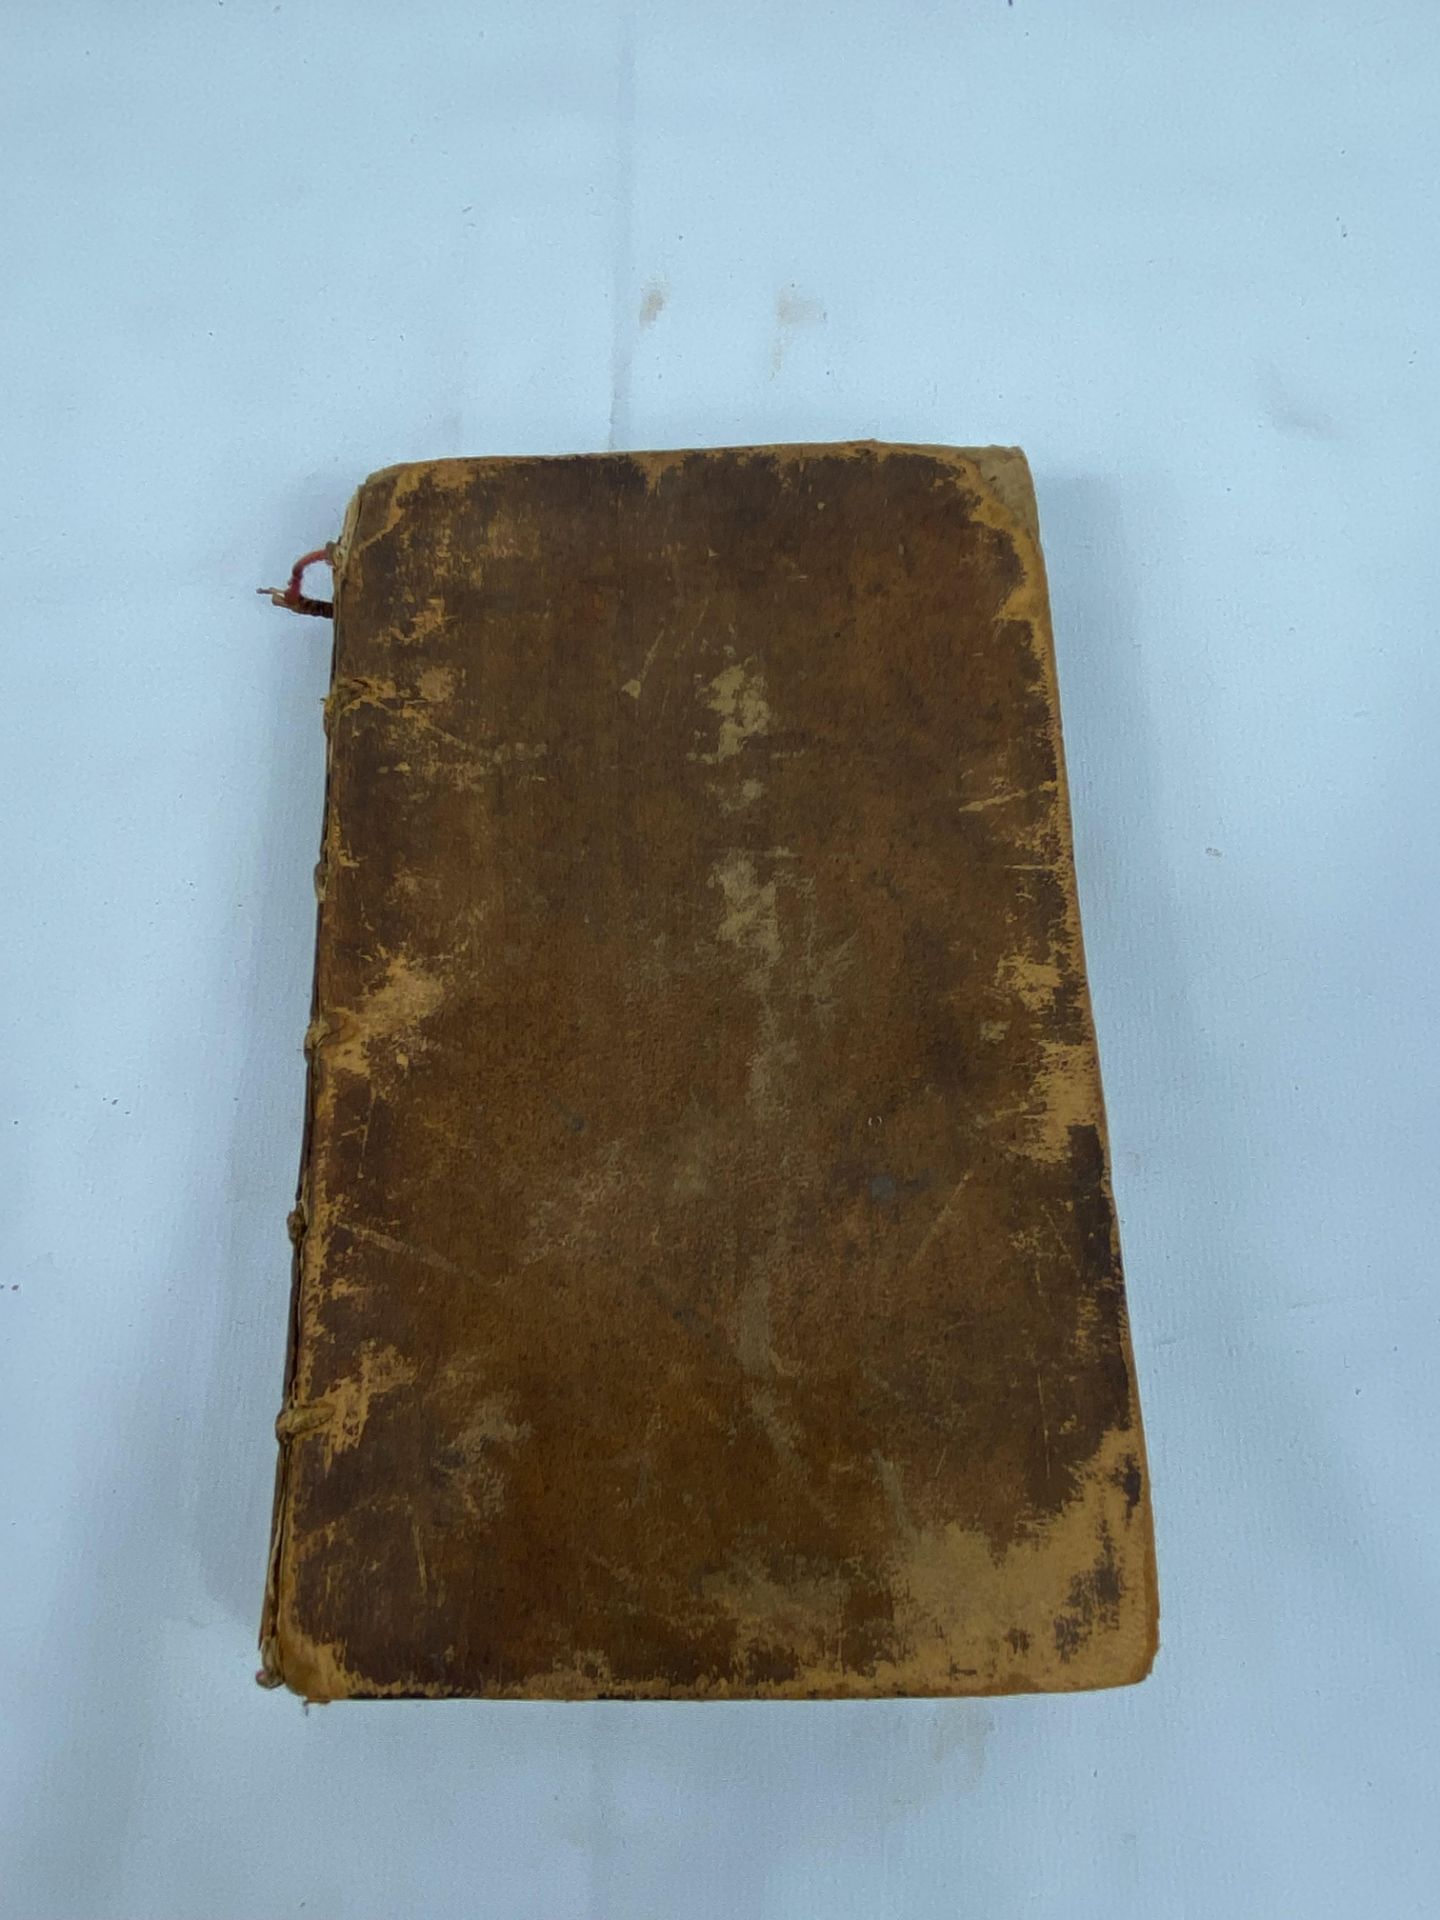 Leather bound Devine Conduct of the Mystery of Providence by John Flavell - Image 2 of 4